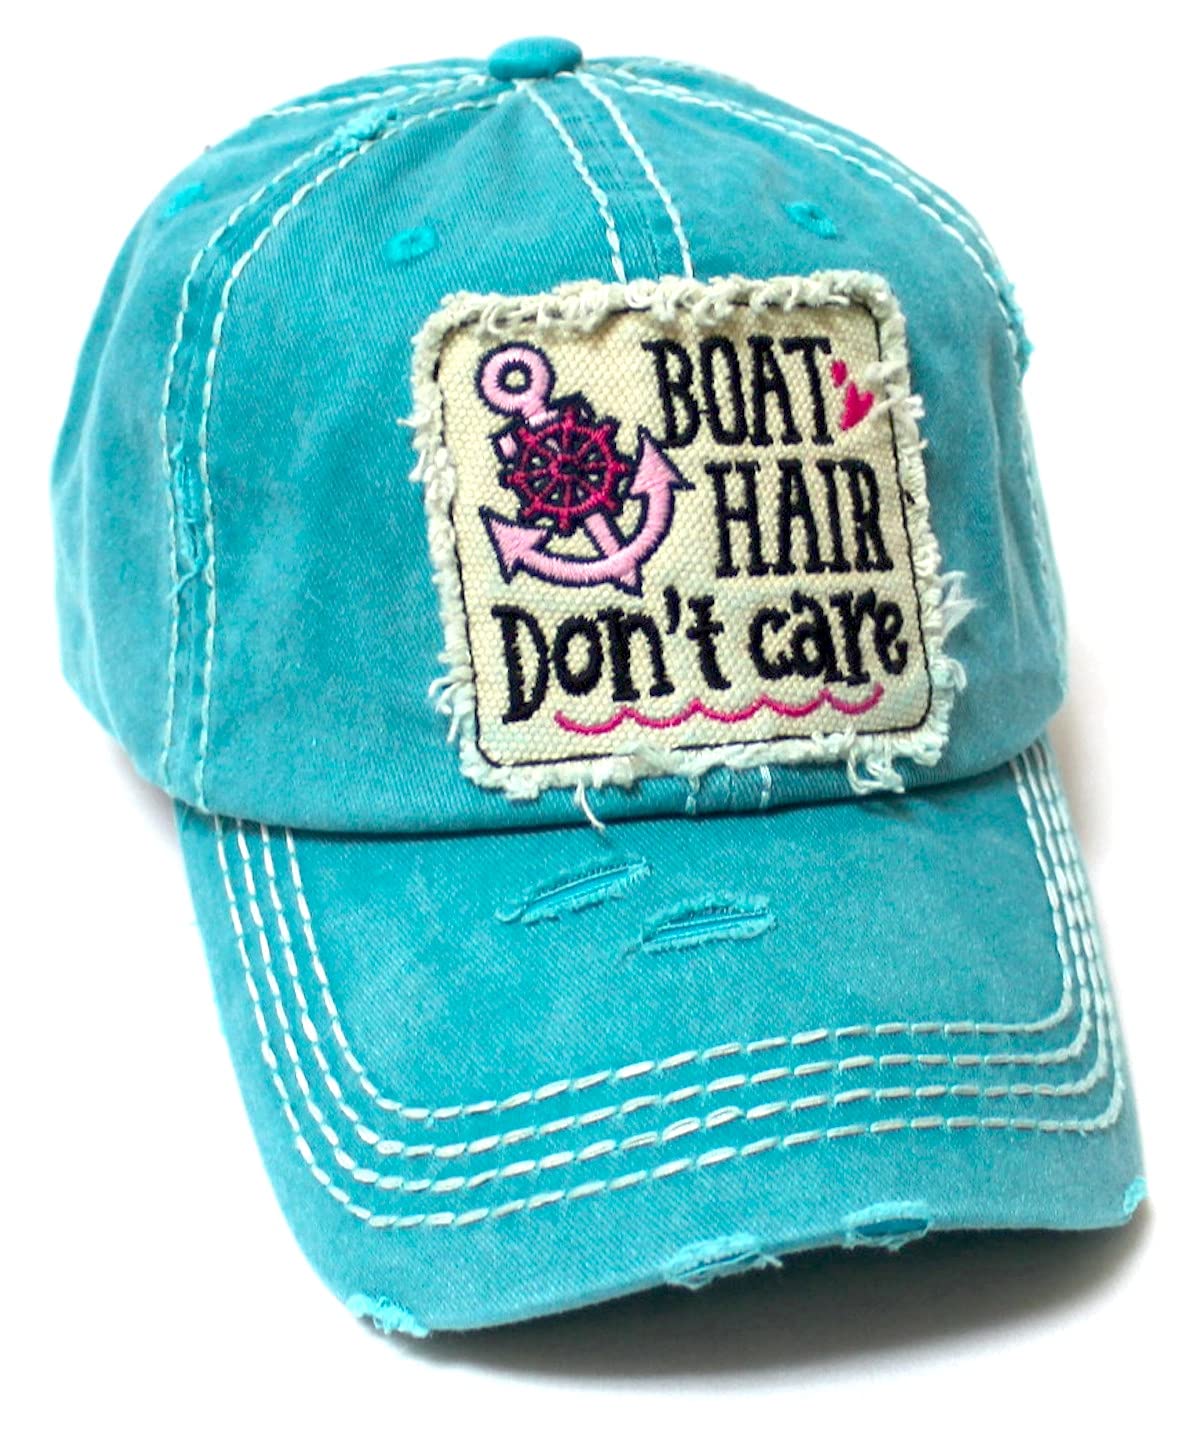 CAPS 'N VINTAGE Women's Ballcap Boat Hair Don't Care Patch Embroidery Hat